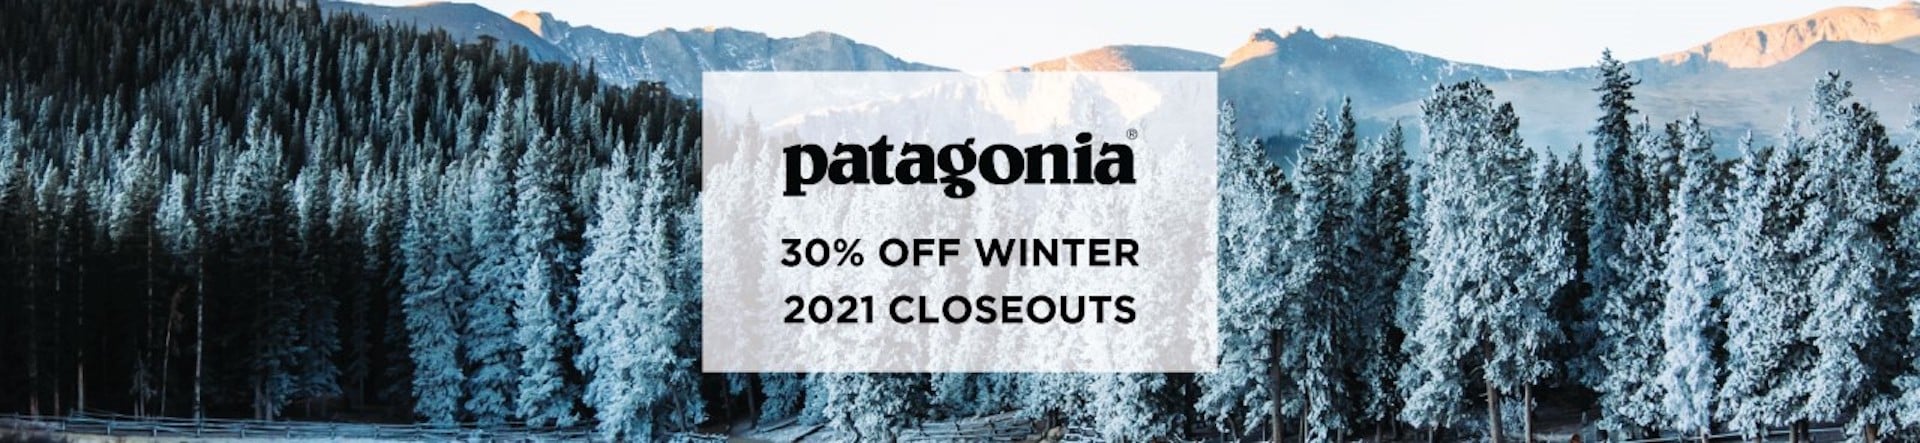 30% Off Patagonia Winter 2021 Closeouts